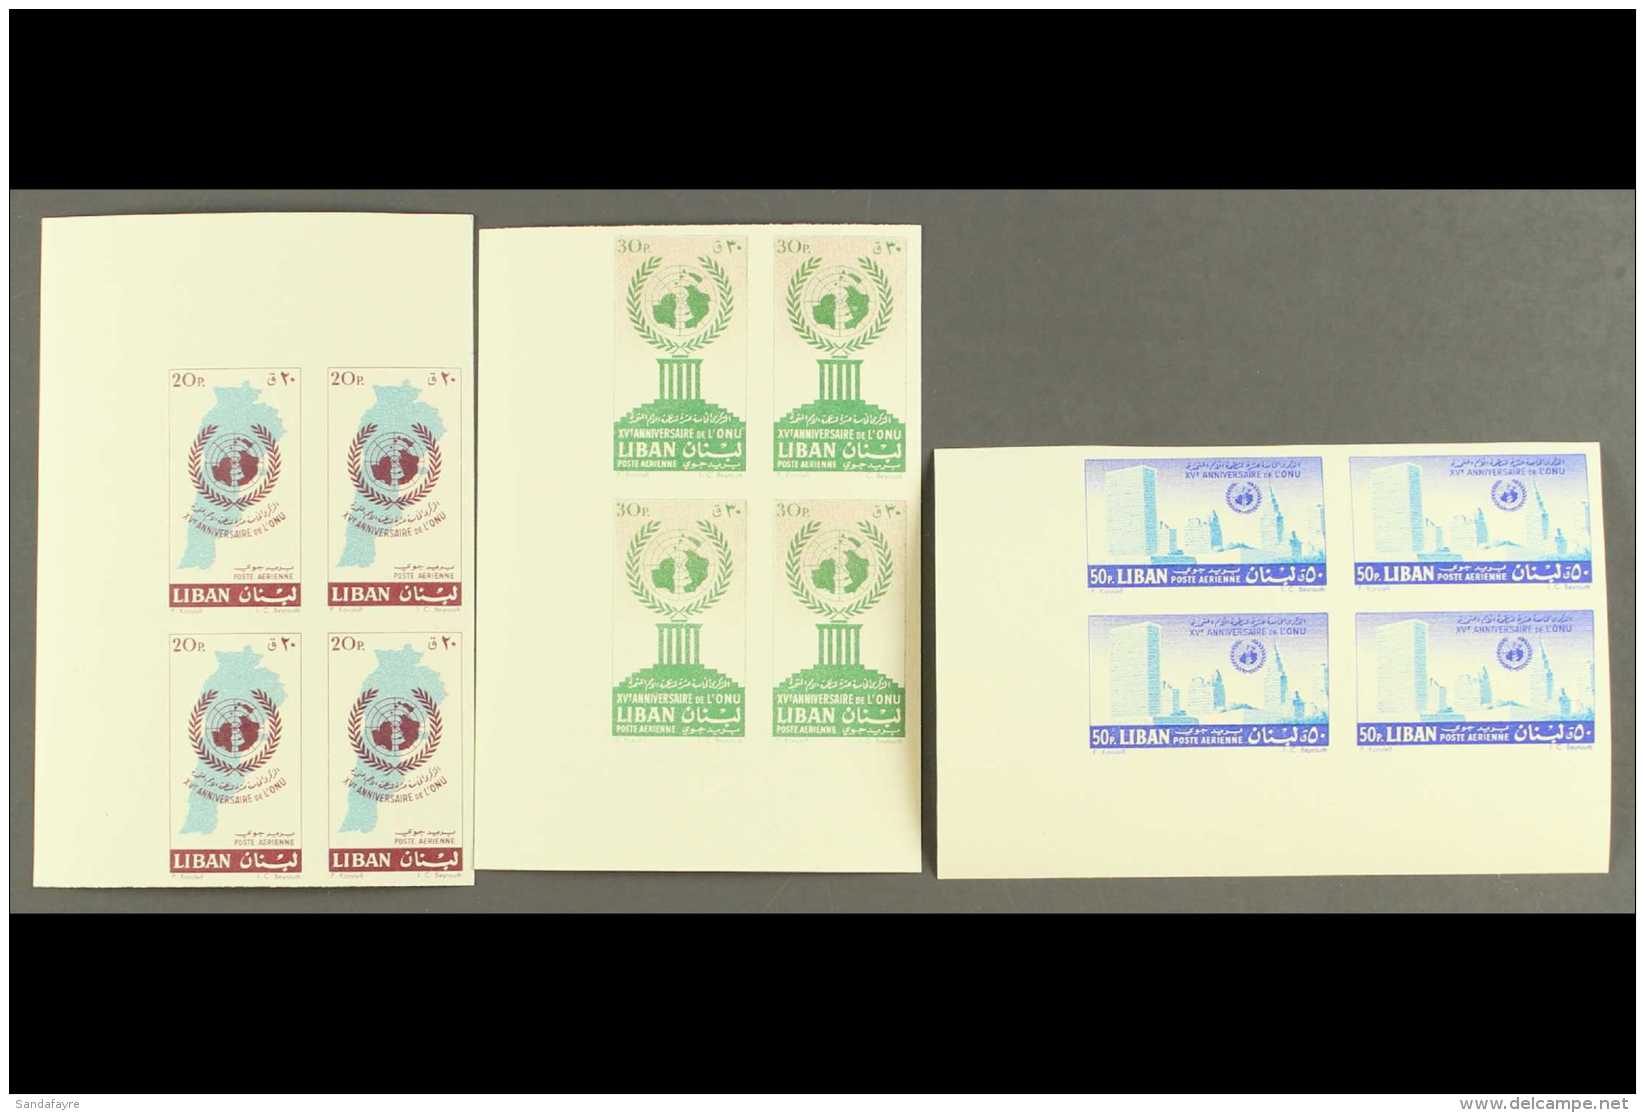 UNITED NATIONS Lebanon 1961 Anniversary Set, SG 683/85, As Fresh Nhm IMPERF Blocks Of 4 (12 Stamps) For More... - Non Classés